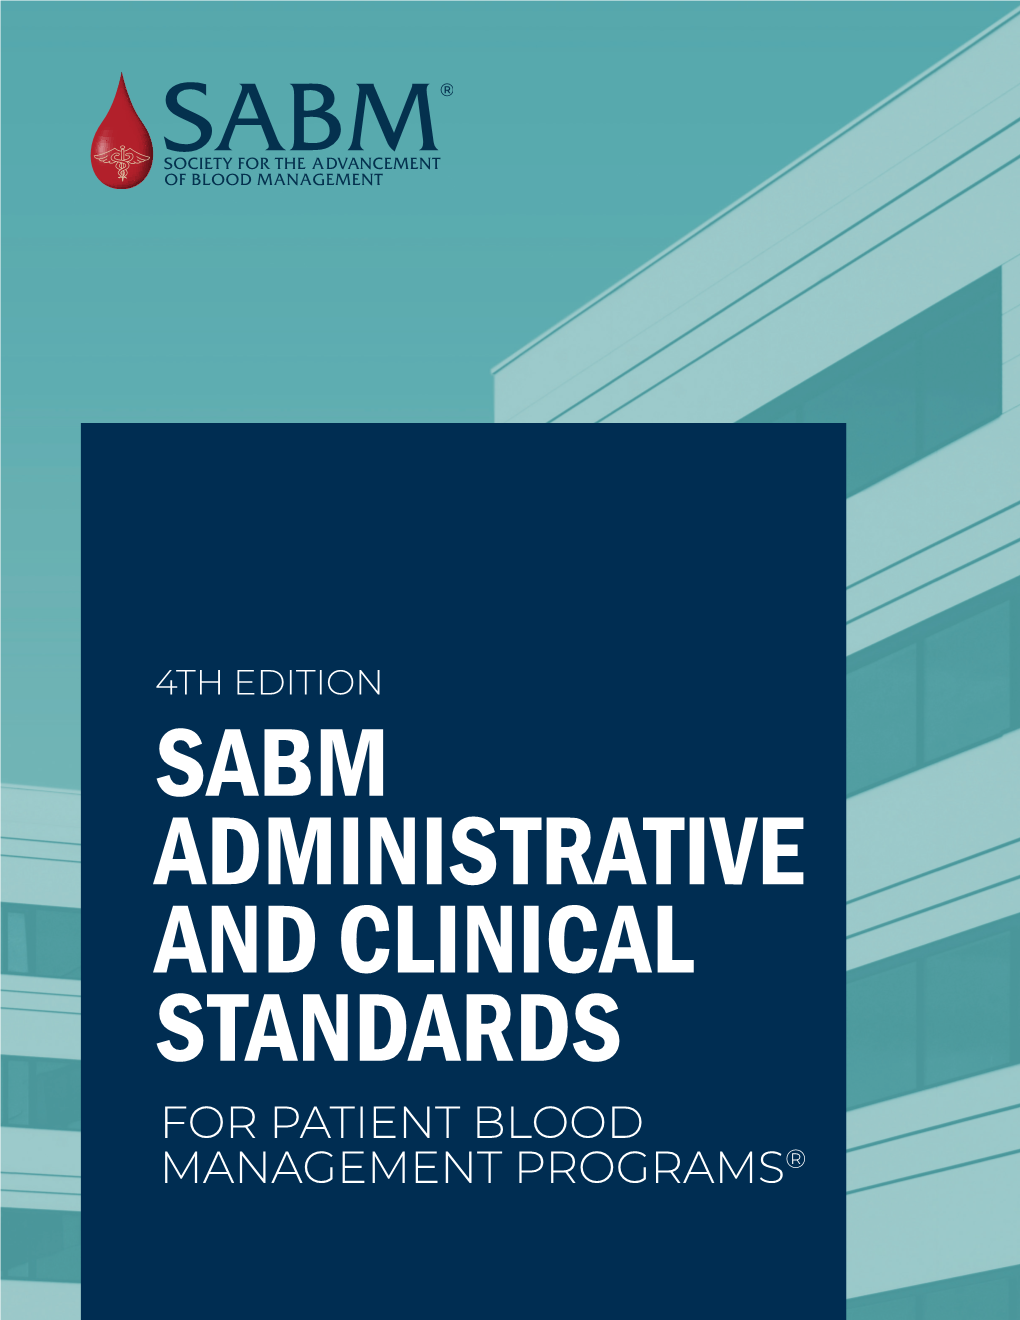 Sabm Administrative and Clinical Standards for Patient Blood Management Programs® Table of Contents